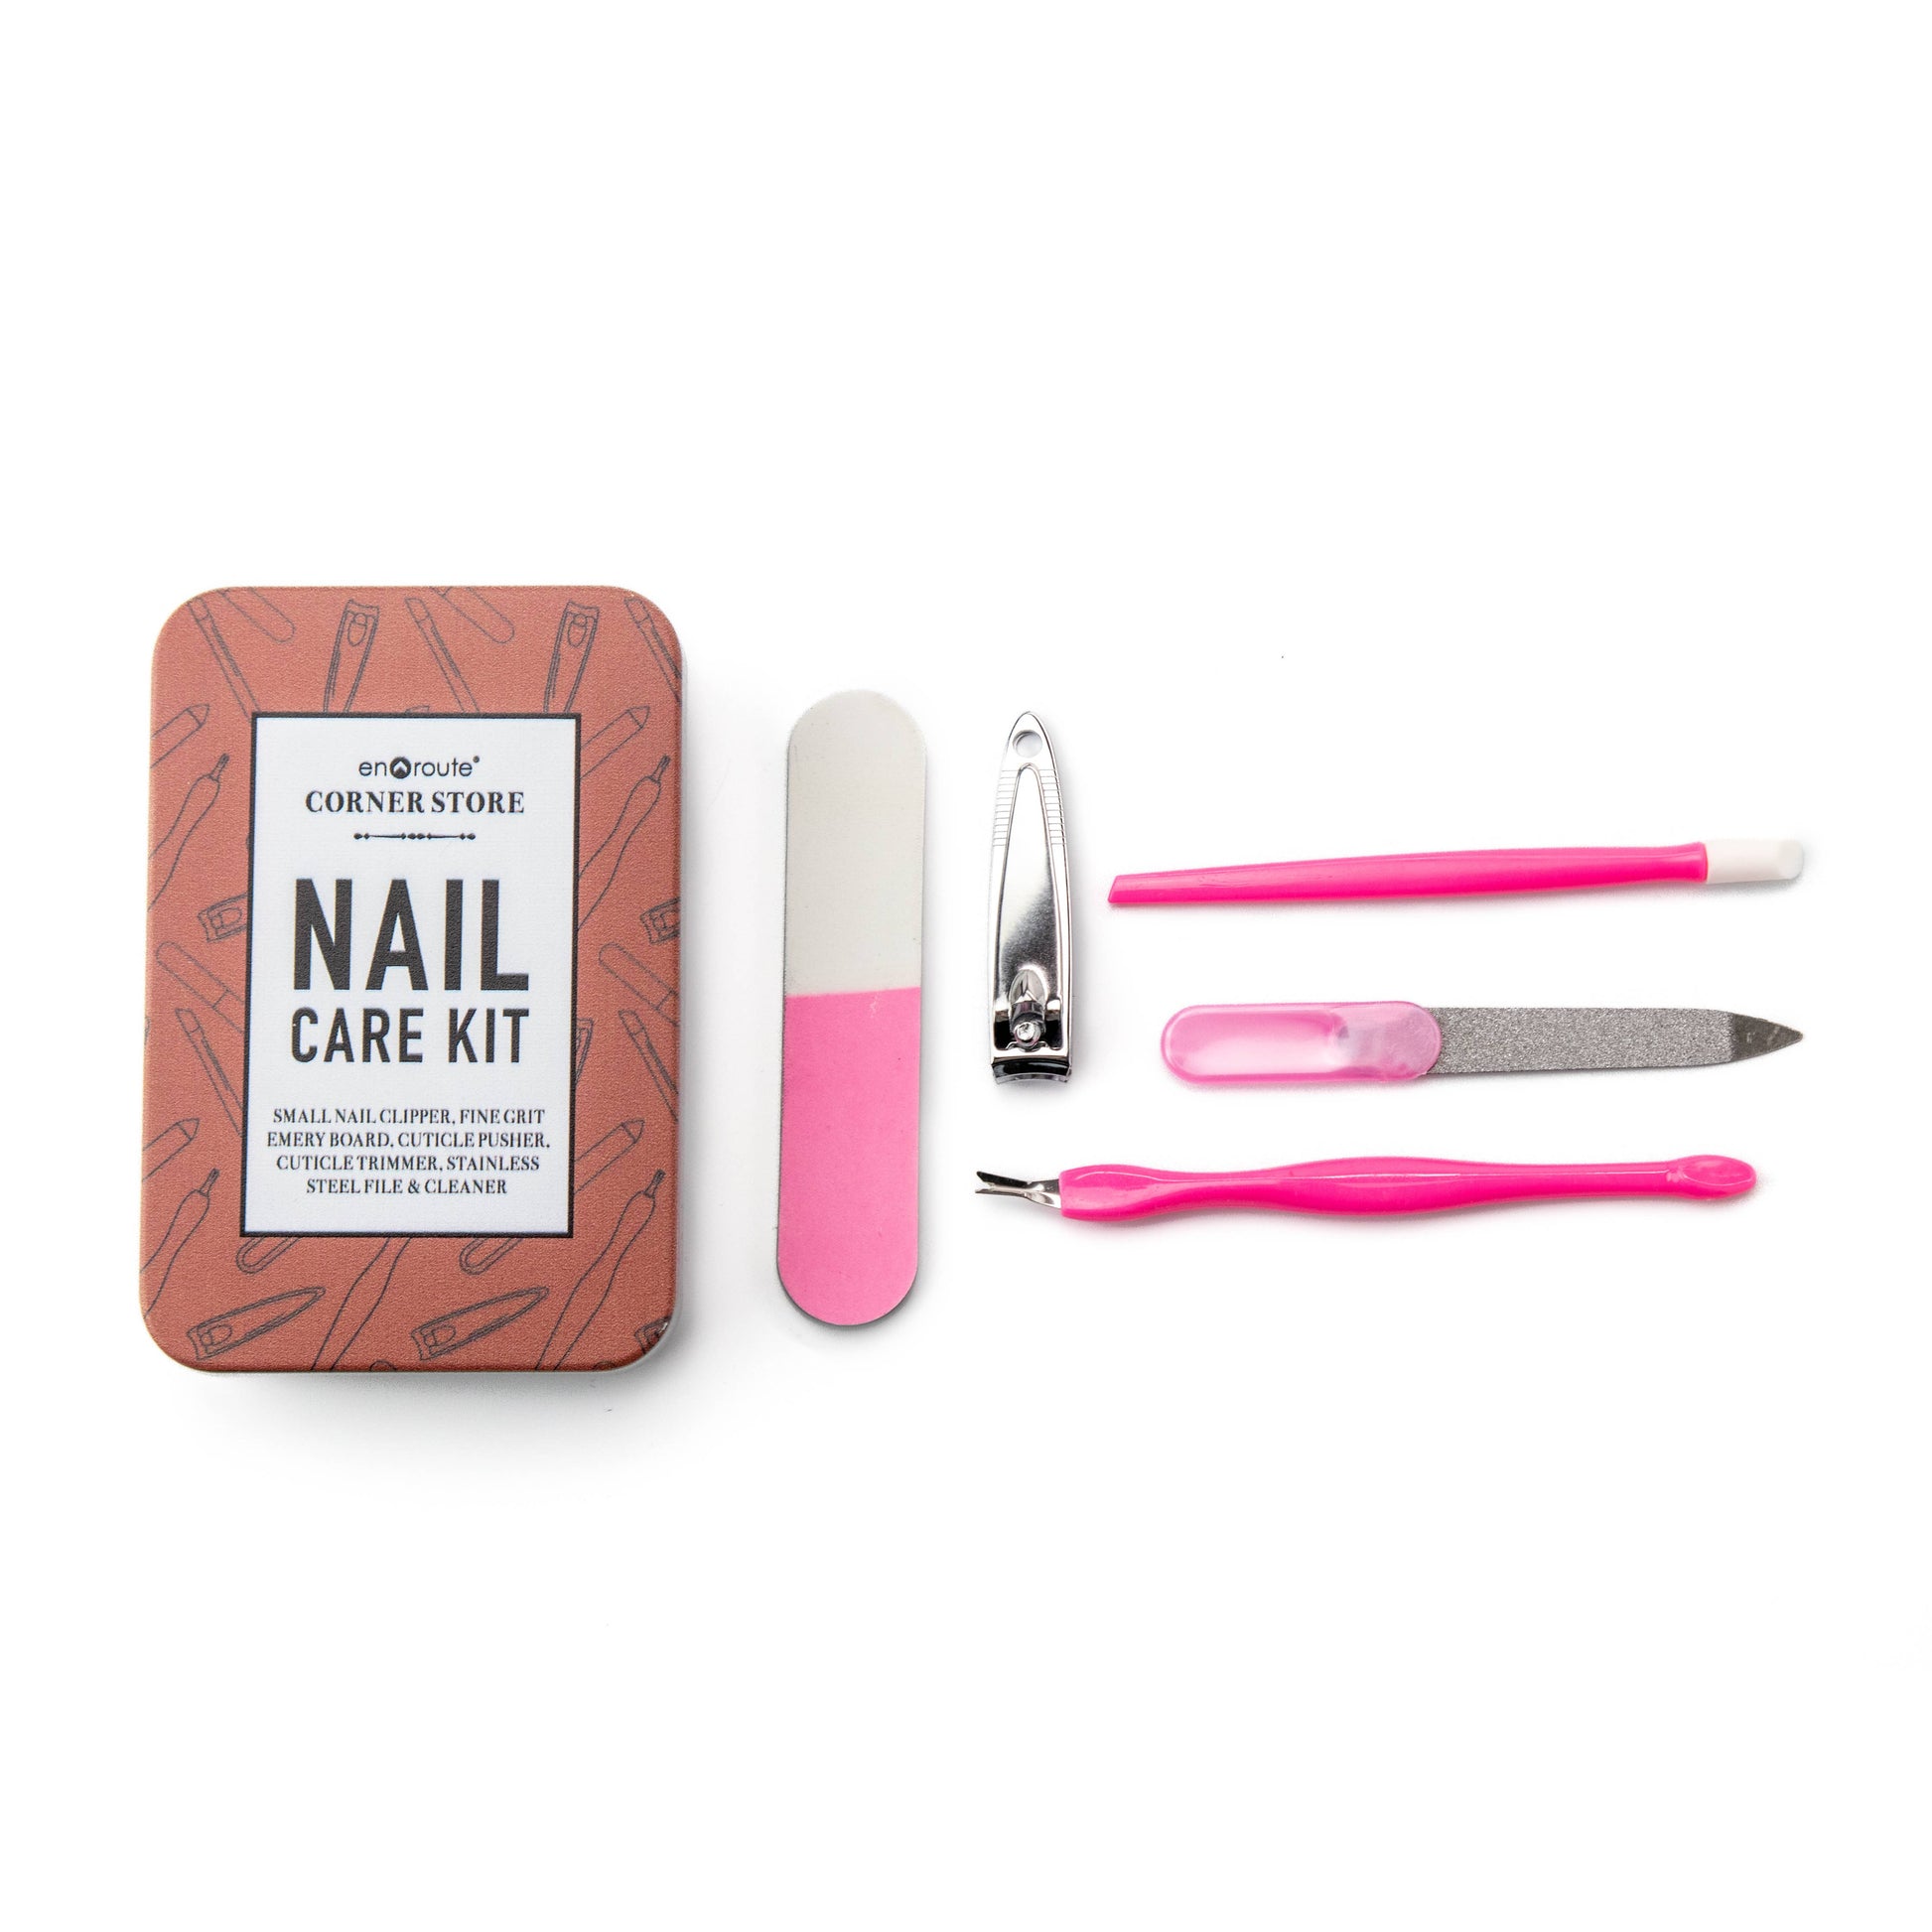 close up of a nail care kit and its contents